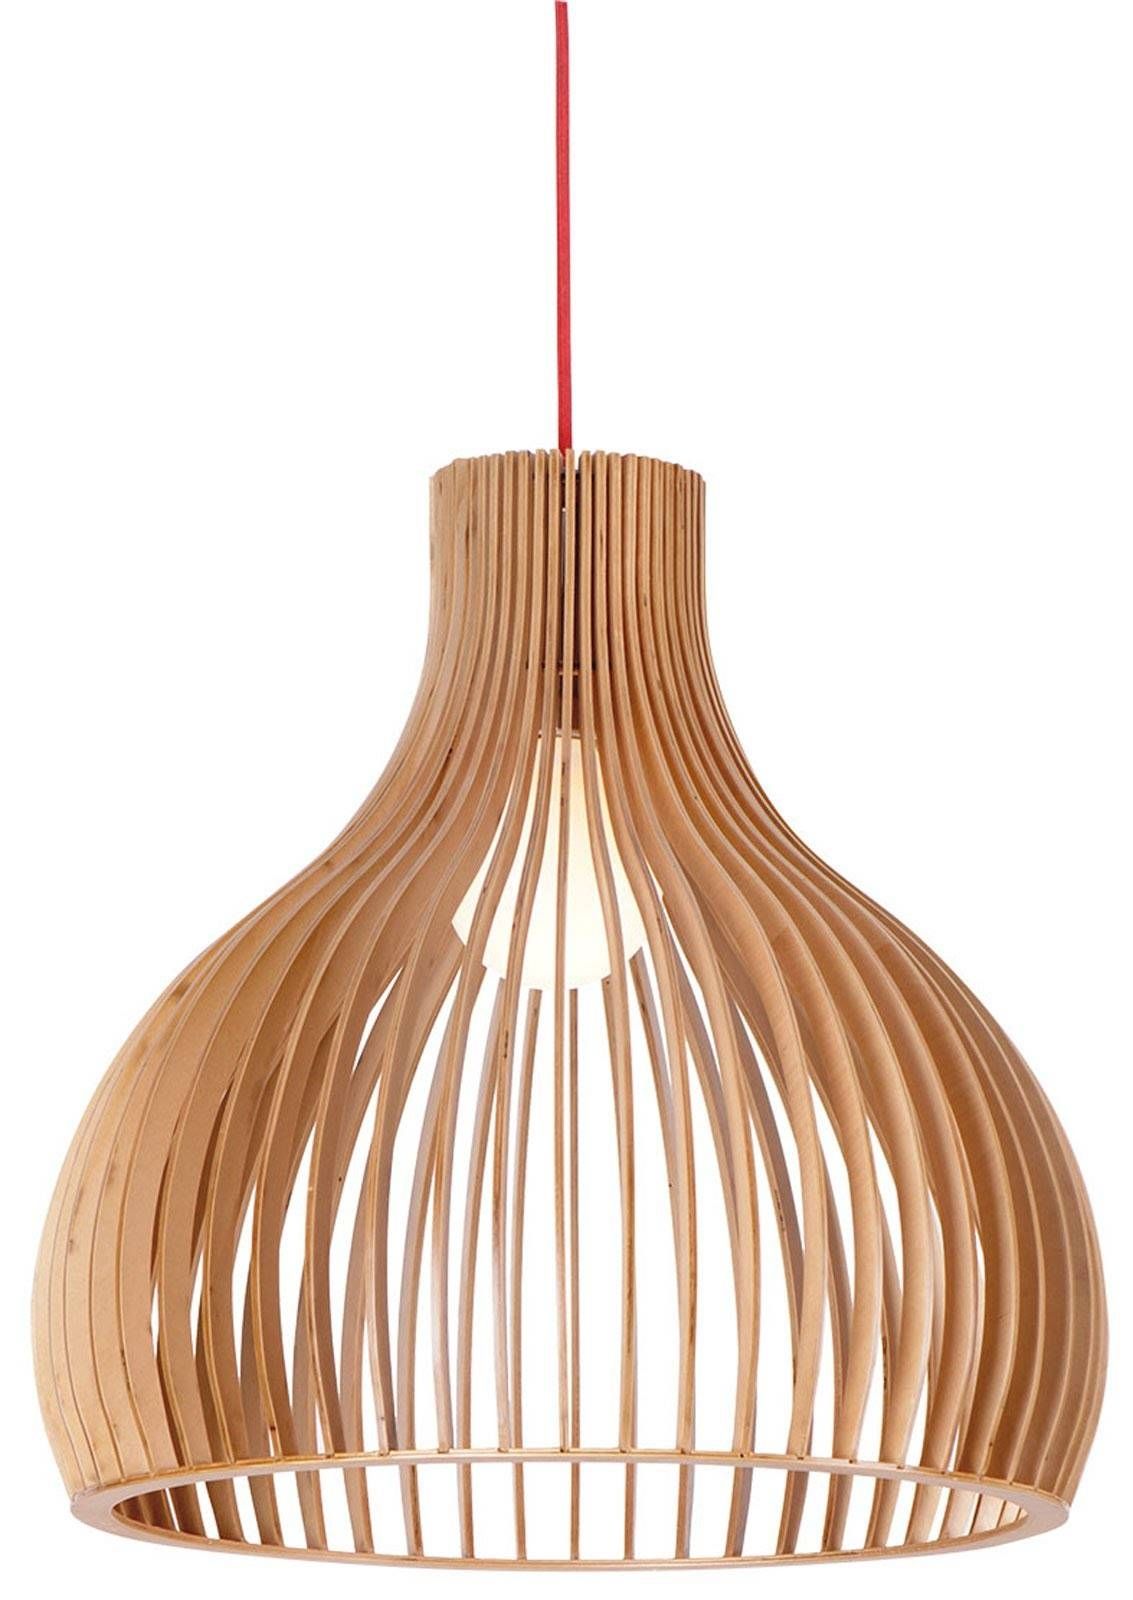 Buy Wood Pendant Light In Melbourne [malmo] – Youtube With Regard To Wooden Pendant Lights (View 12 of 15)